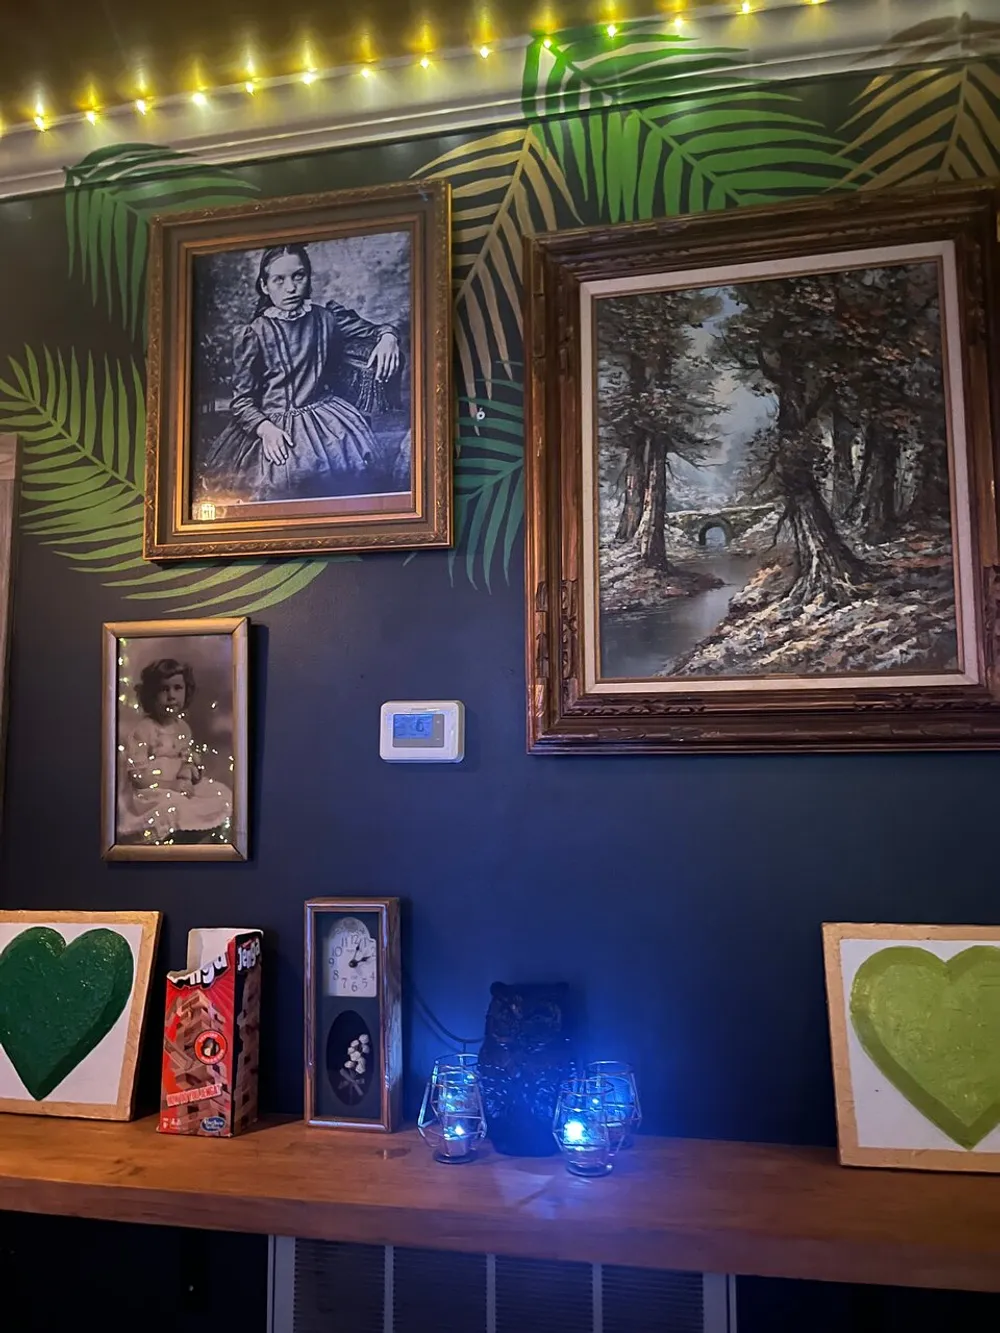 The image displays a stylishly decorated wall with an eclectic mix of artwork and objects including framed pictures and paintings illuminated by string lights above a wooden shelf adorned with unique items and glowing bulb lights